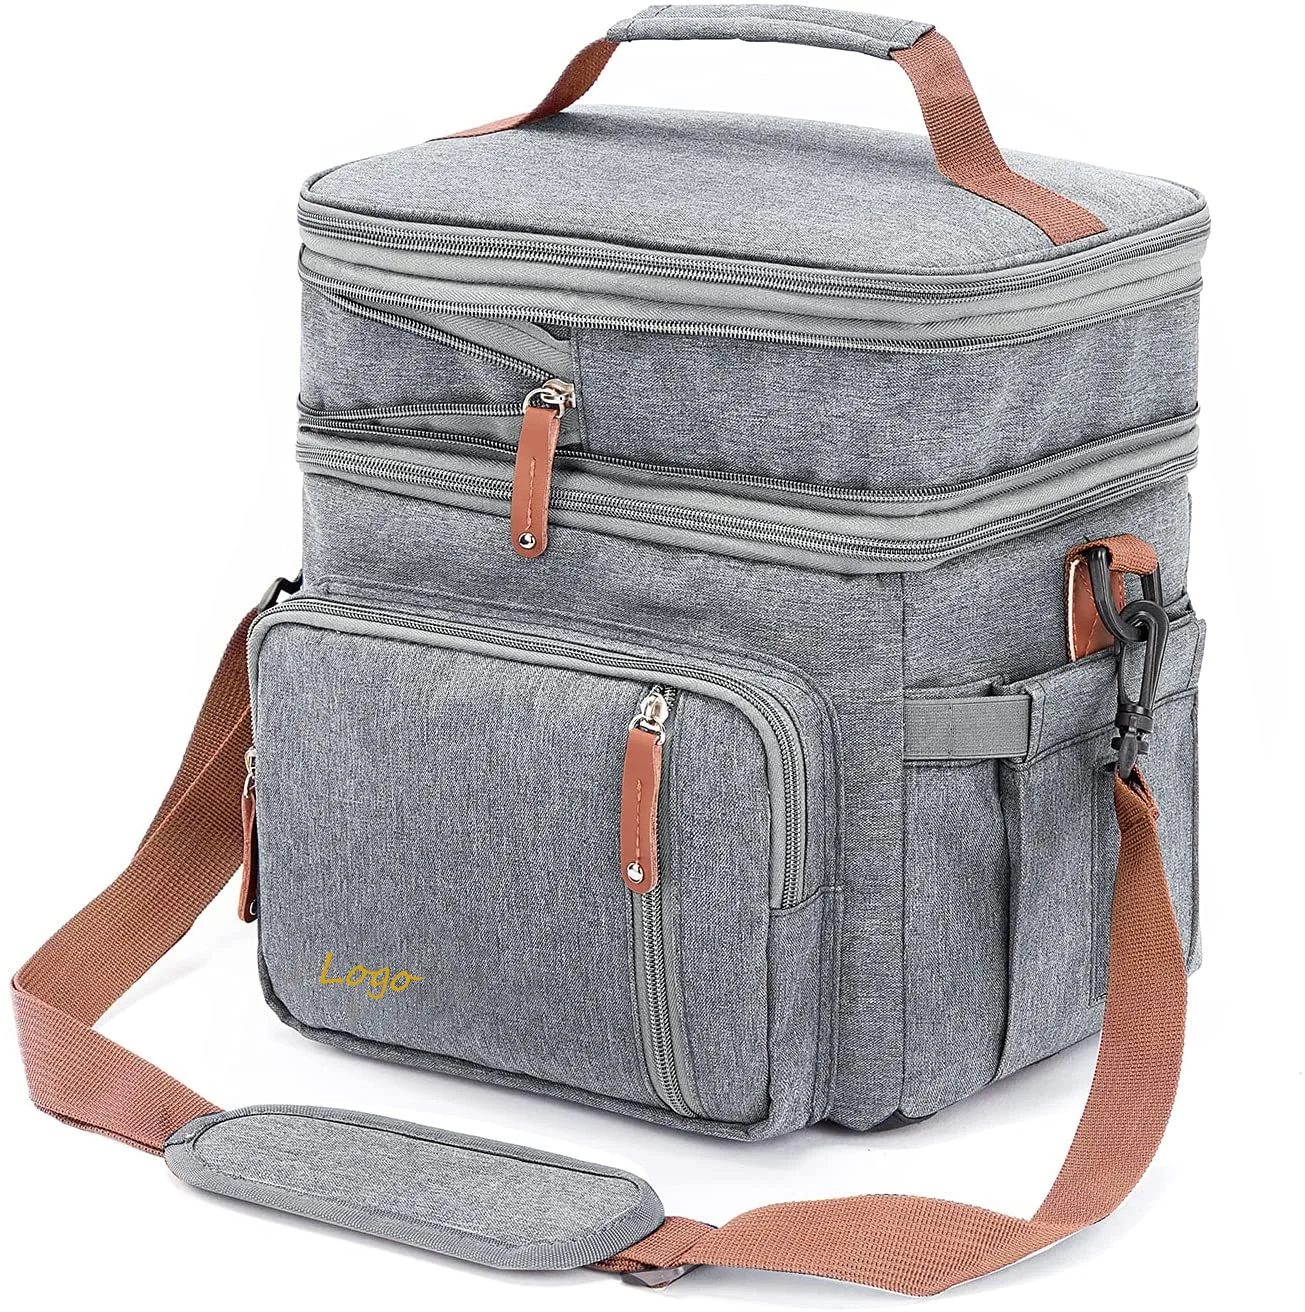 

Grey Men's Double Compartment Lunch Bag Insulated Lunch Cooler Tote with Shoulder 2 Roomy Reusable Water-resistant Lunch Box